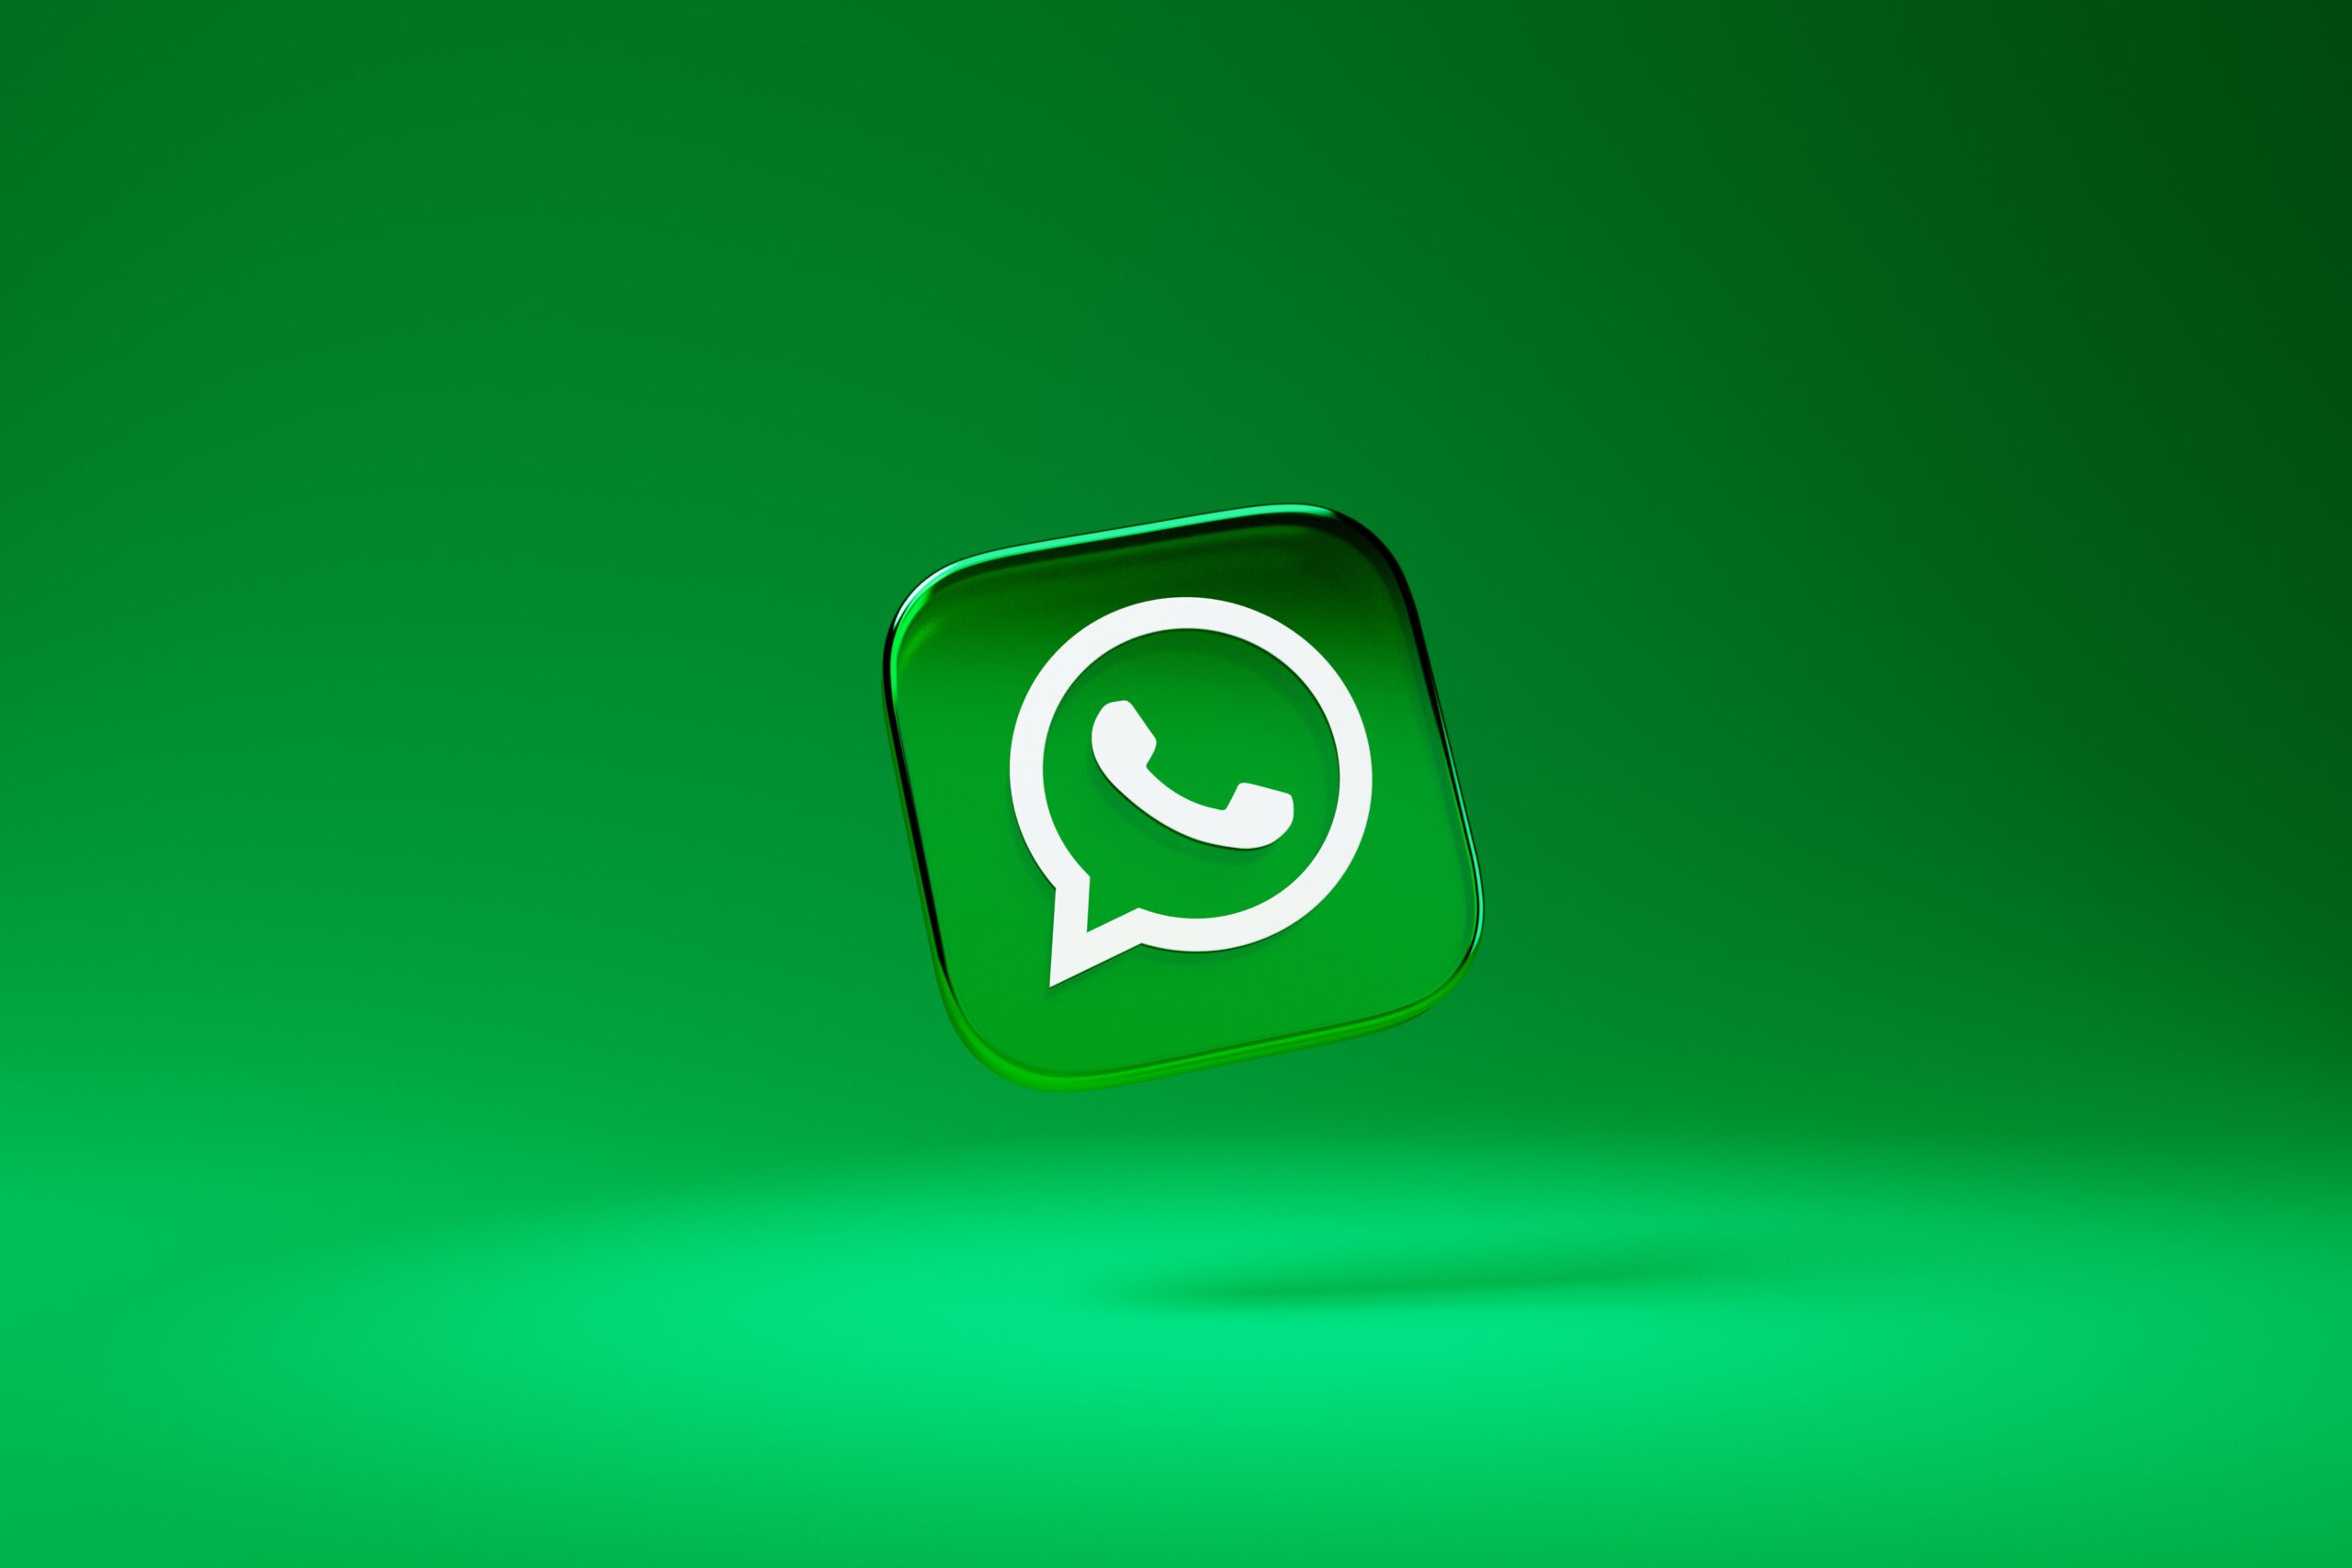 Say goodbye to lengthy voice messages with WhatsApp’s new transcription feature